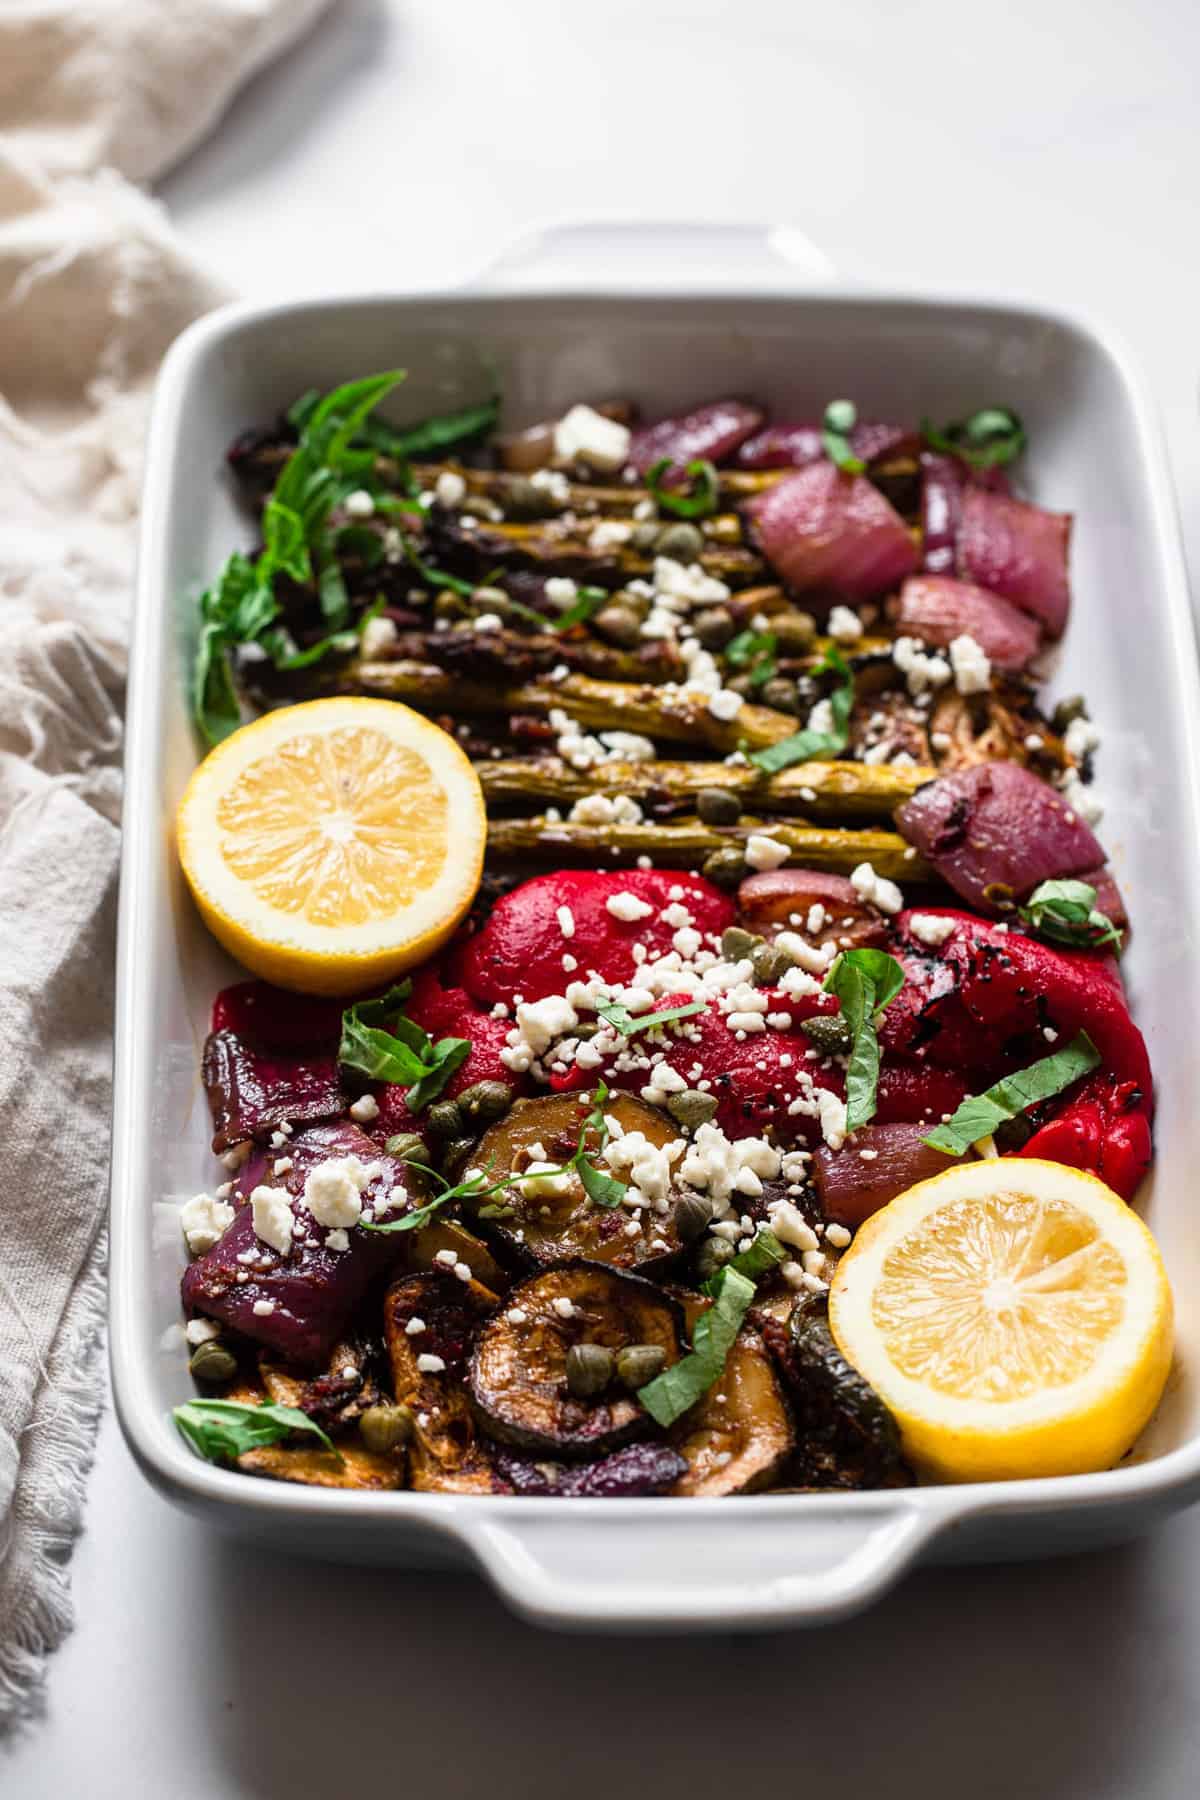 Balsamic grilled vegetable salad in a baking dish with lemon on top